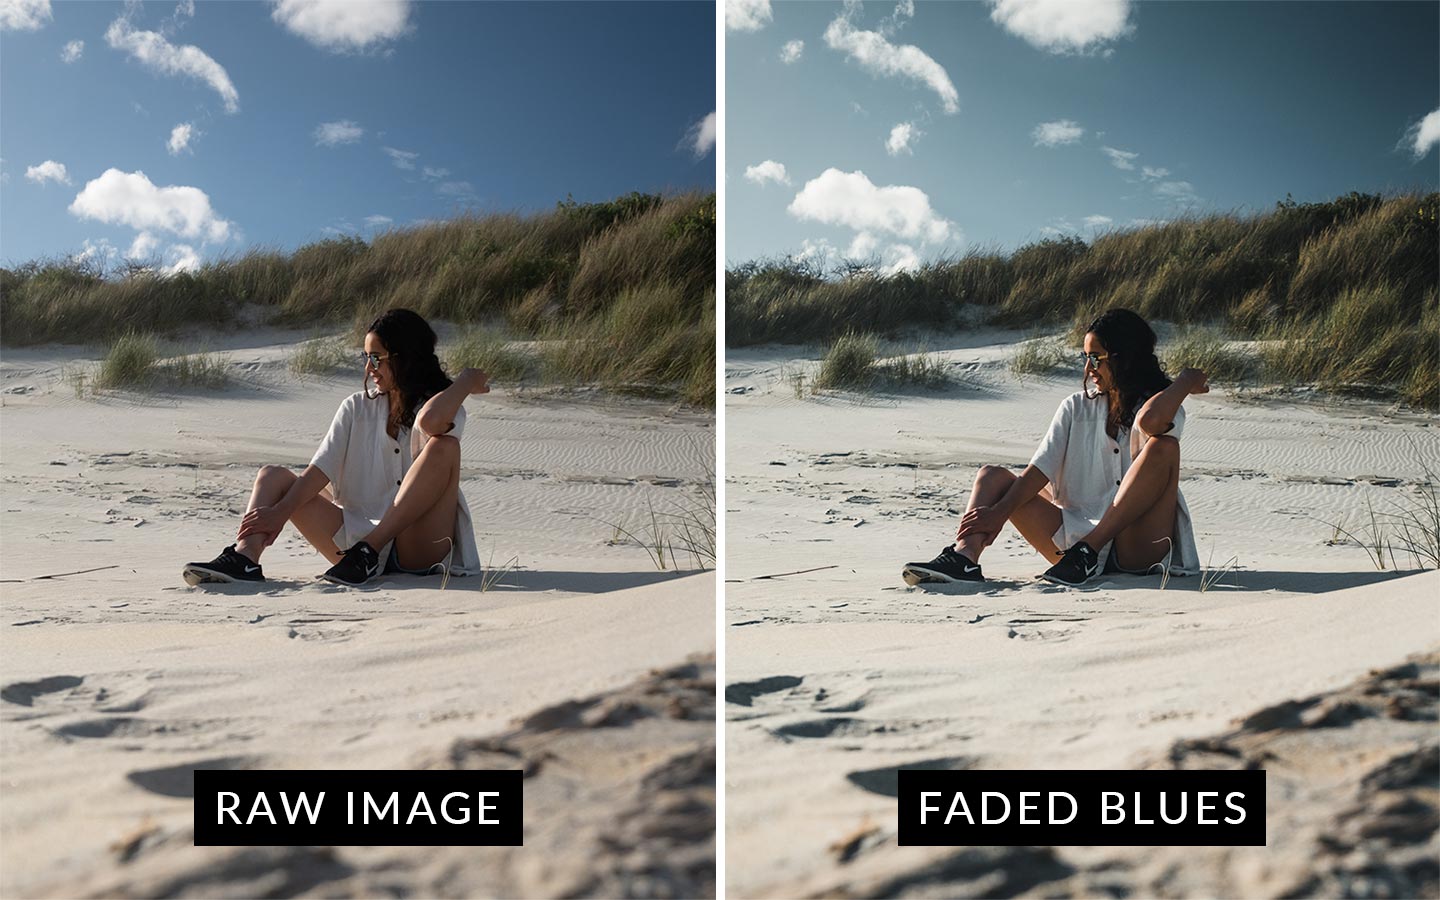 A before and after comparison showing the Faded Blues preset which is included in this moody Lightroom presets package.